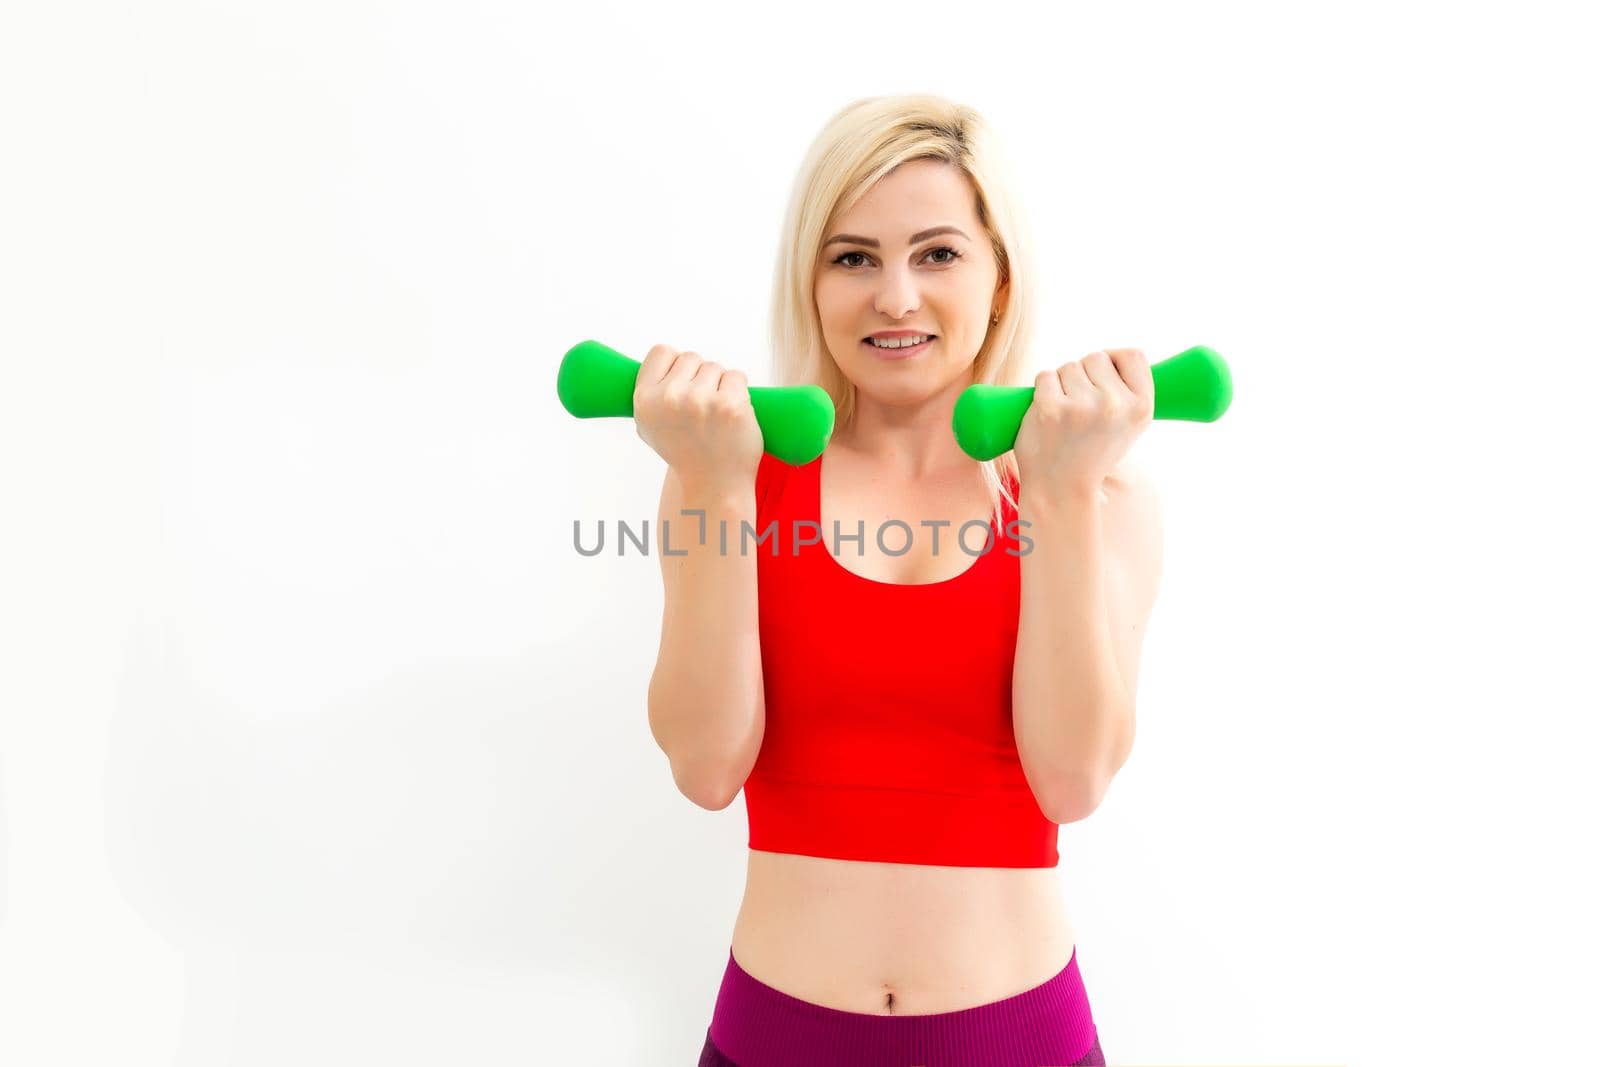 Smiling athletic woman pumping up muscles with dumbbells on white background